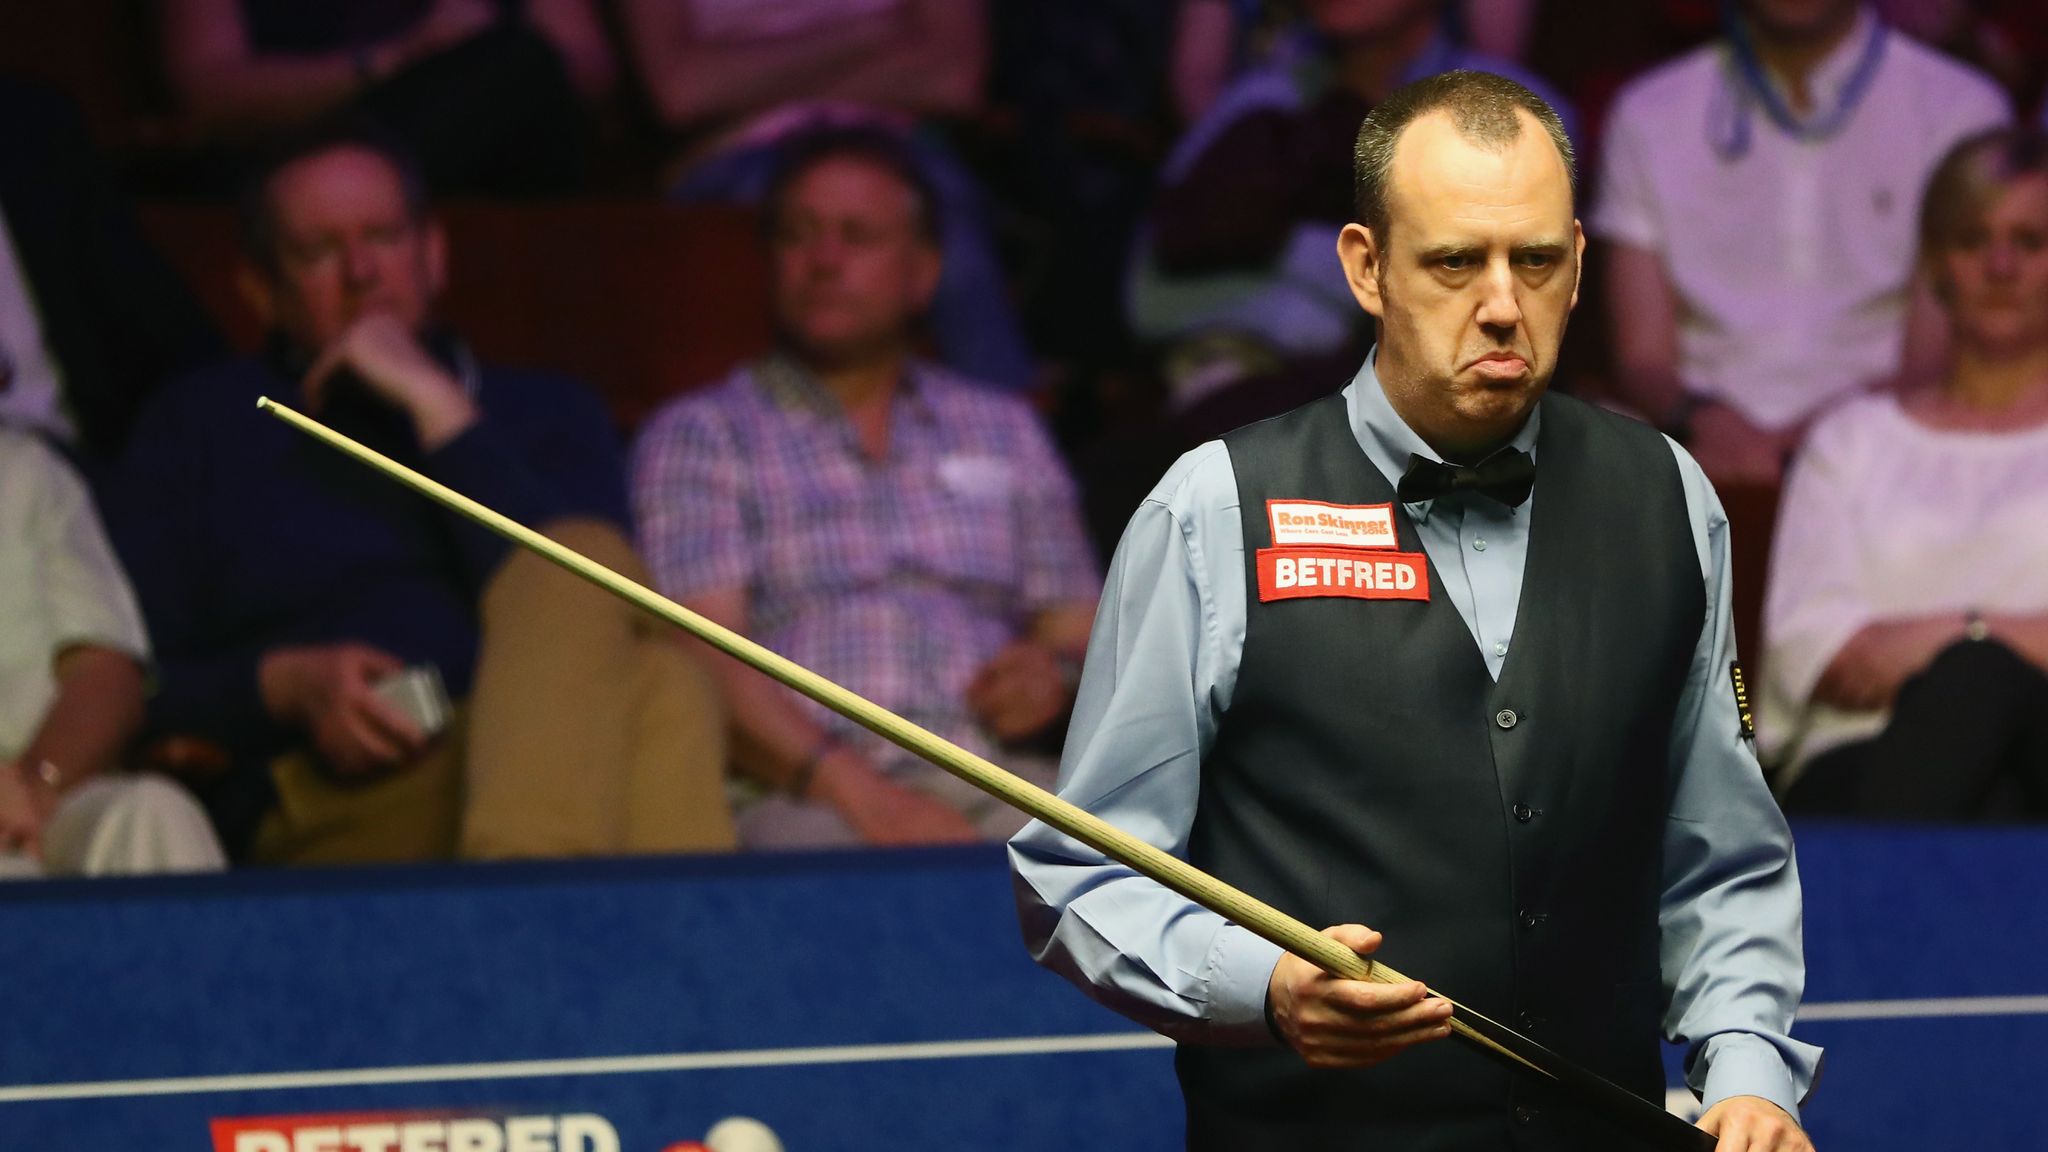 Mark Williams, James Cahill and Mark Selby out of World Snooker Championship Snooker News Sky Sports